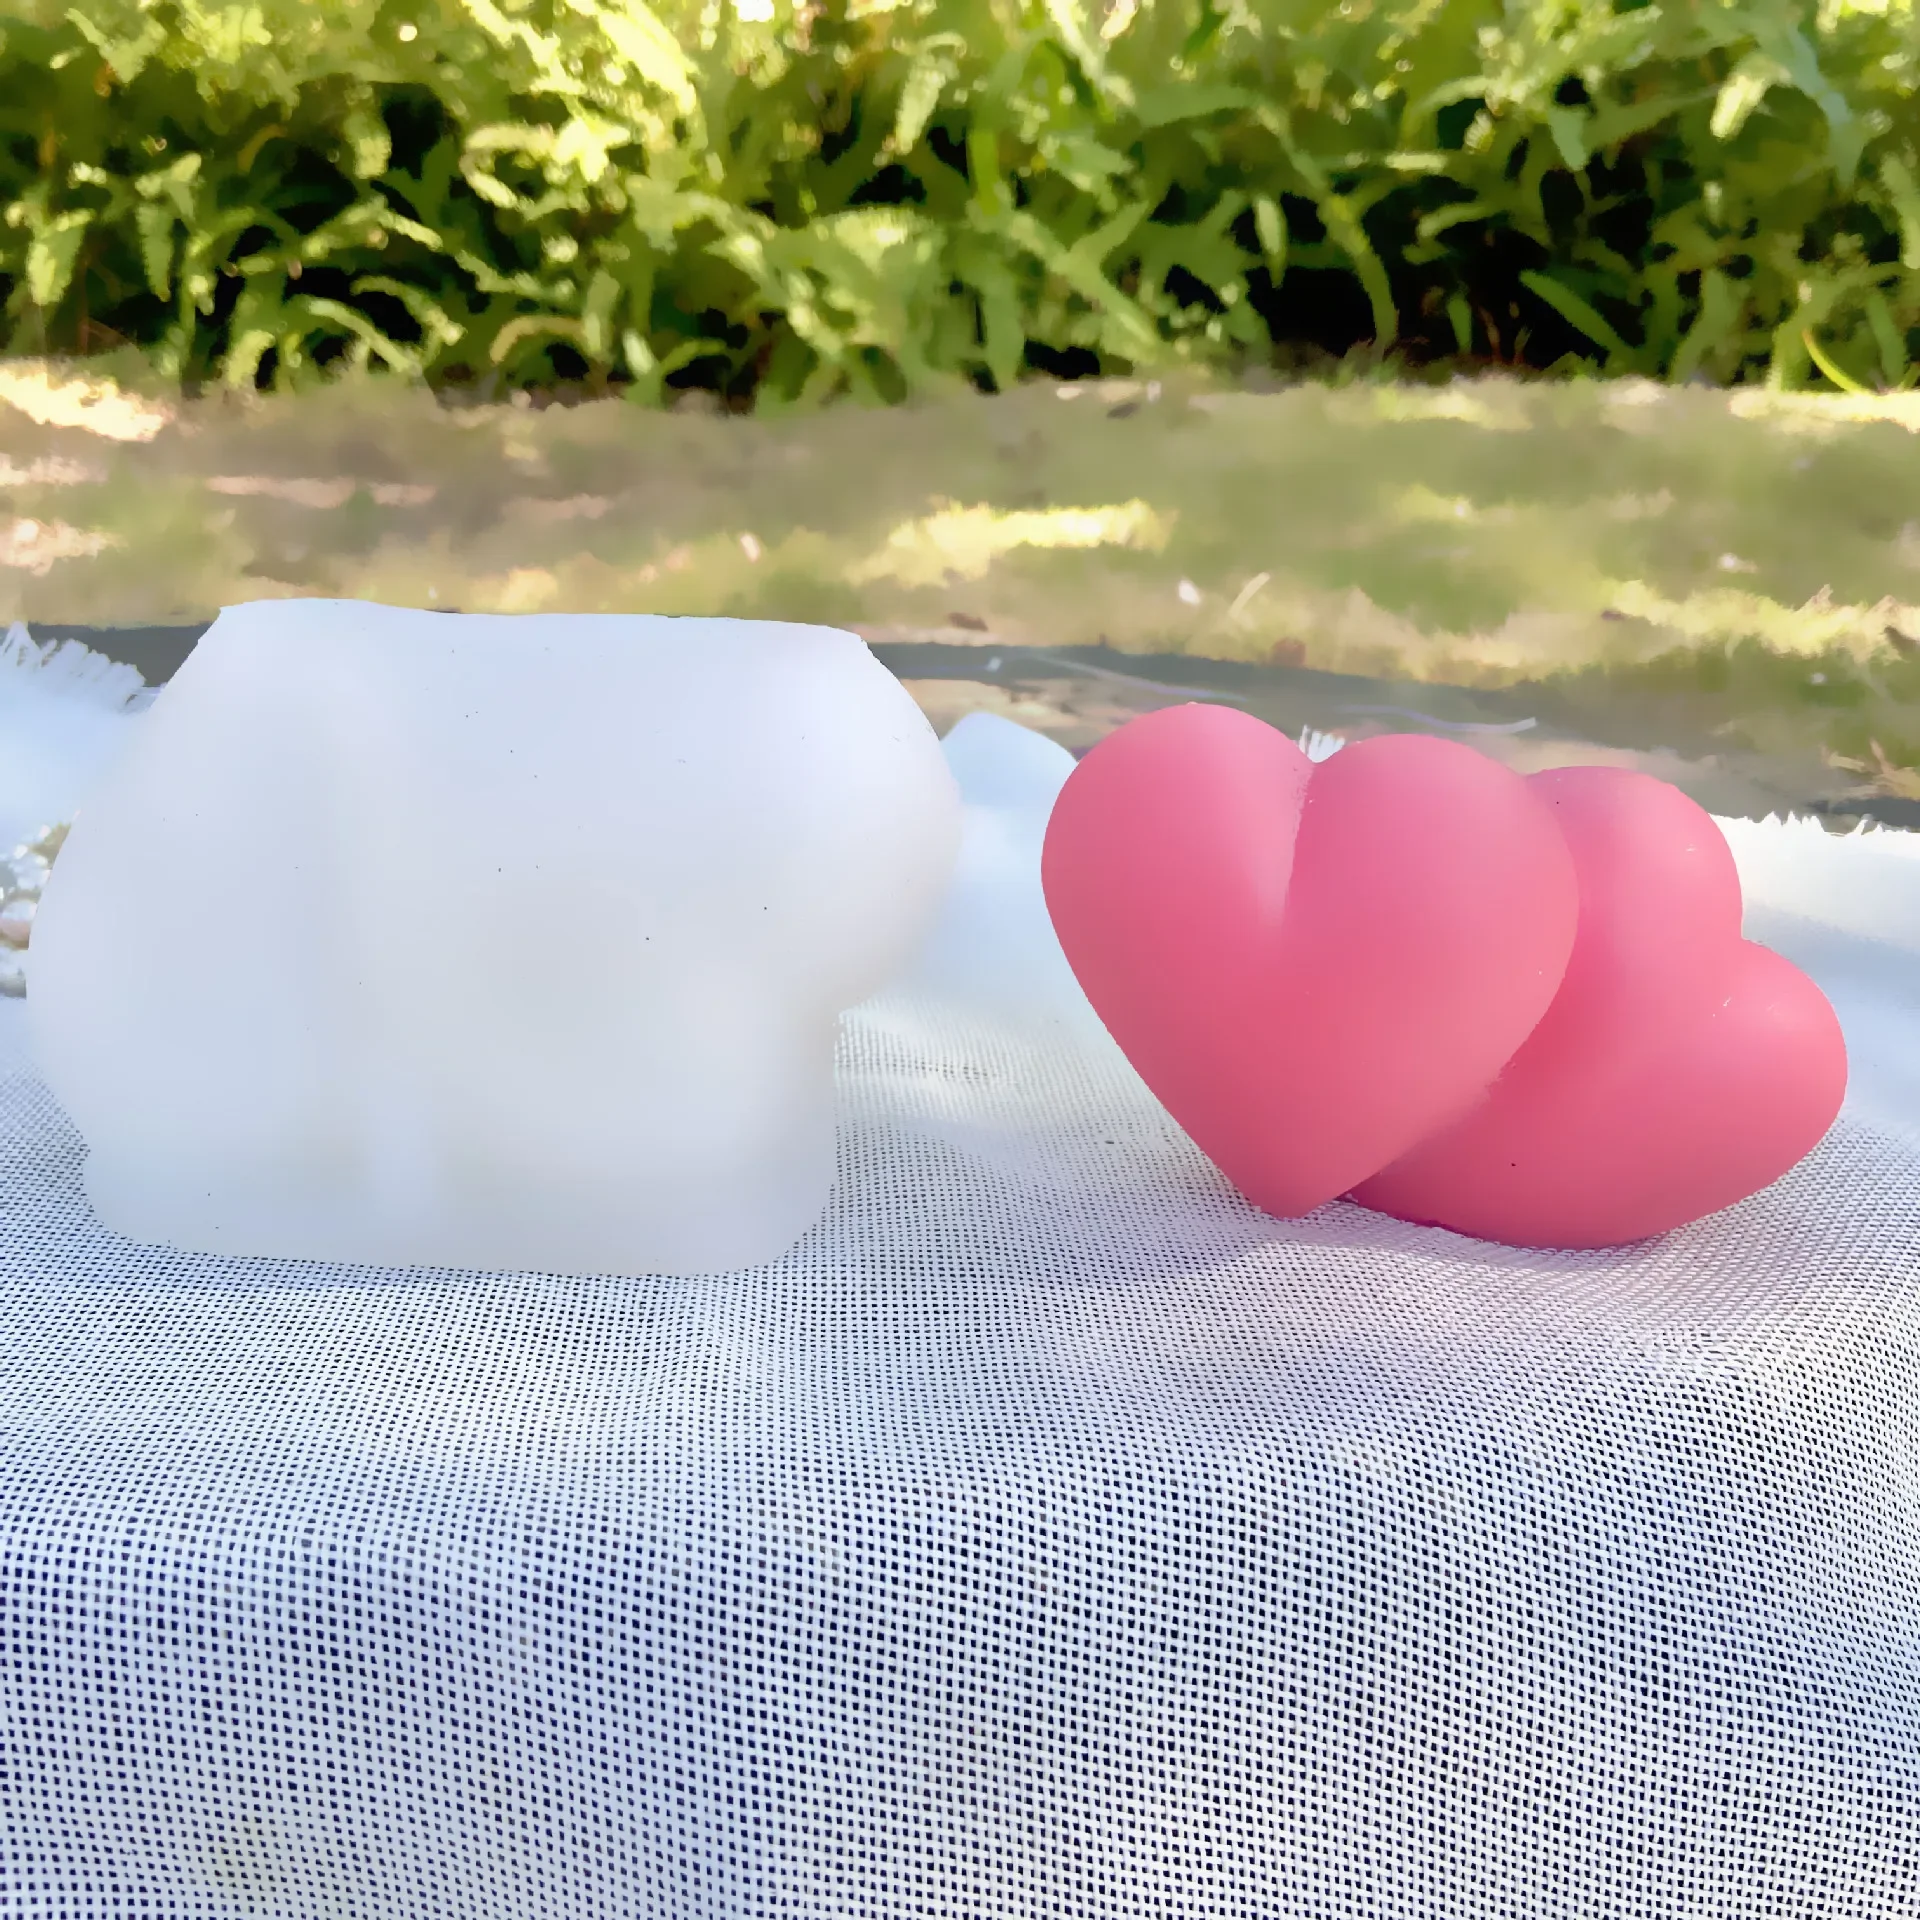 Heart-Shaped Candle Mould Heart-to-Heart Heart Aromatherapy Silicone Mold  Doppel Herz Soap Plaster Decoration Cake Mold 8346 - AliExpress